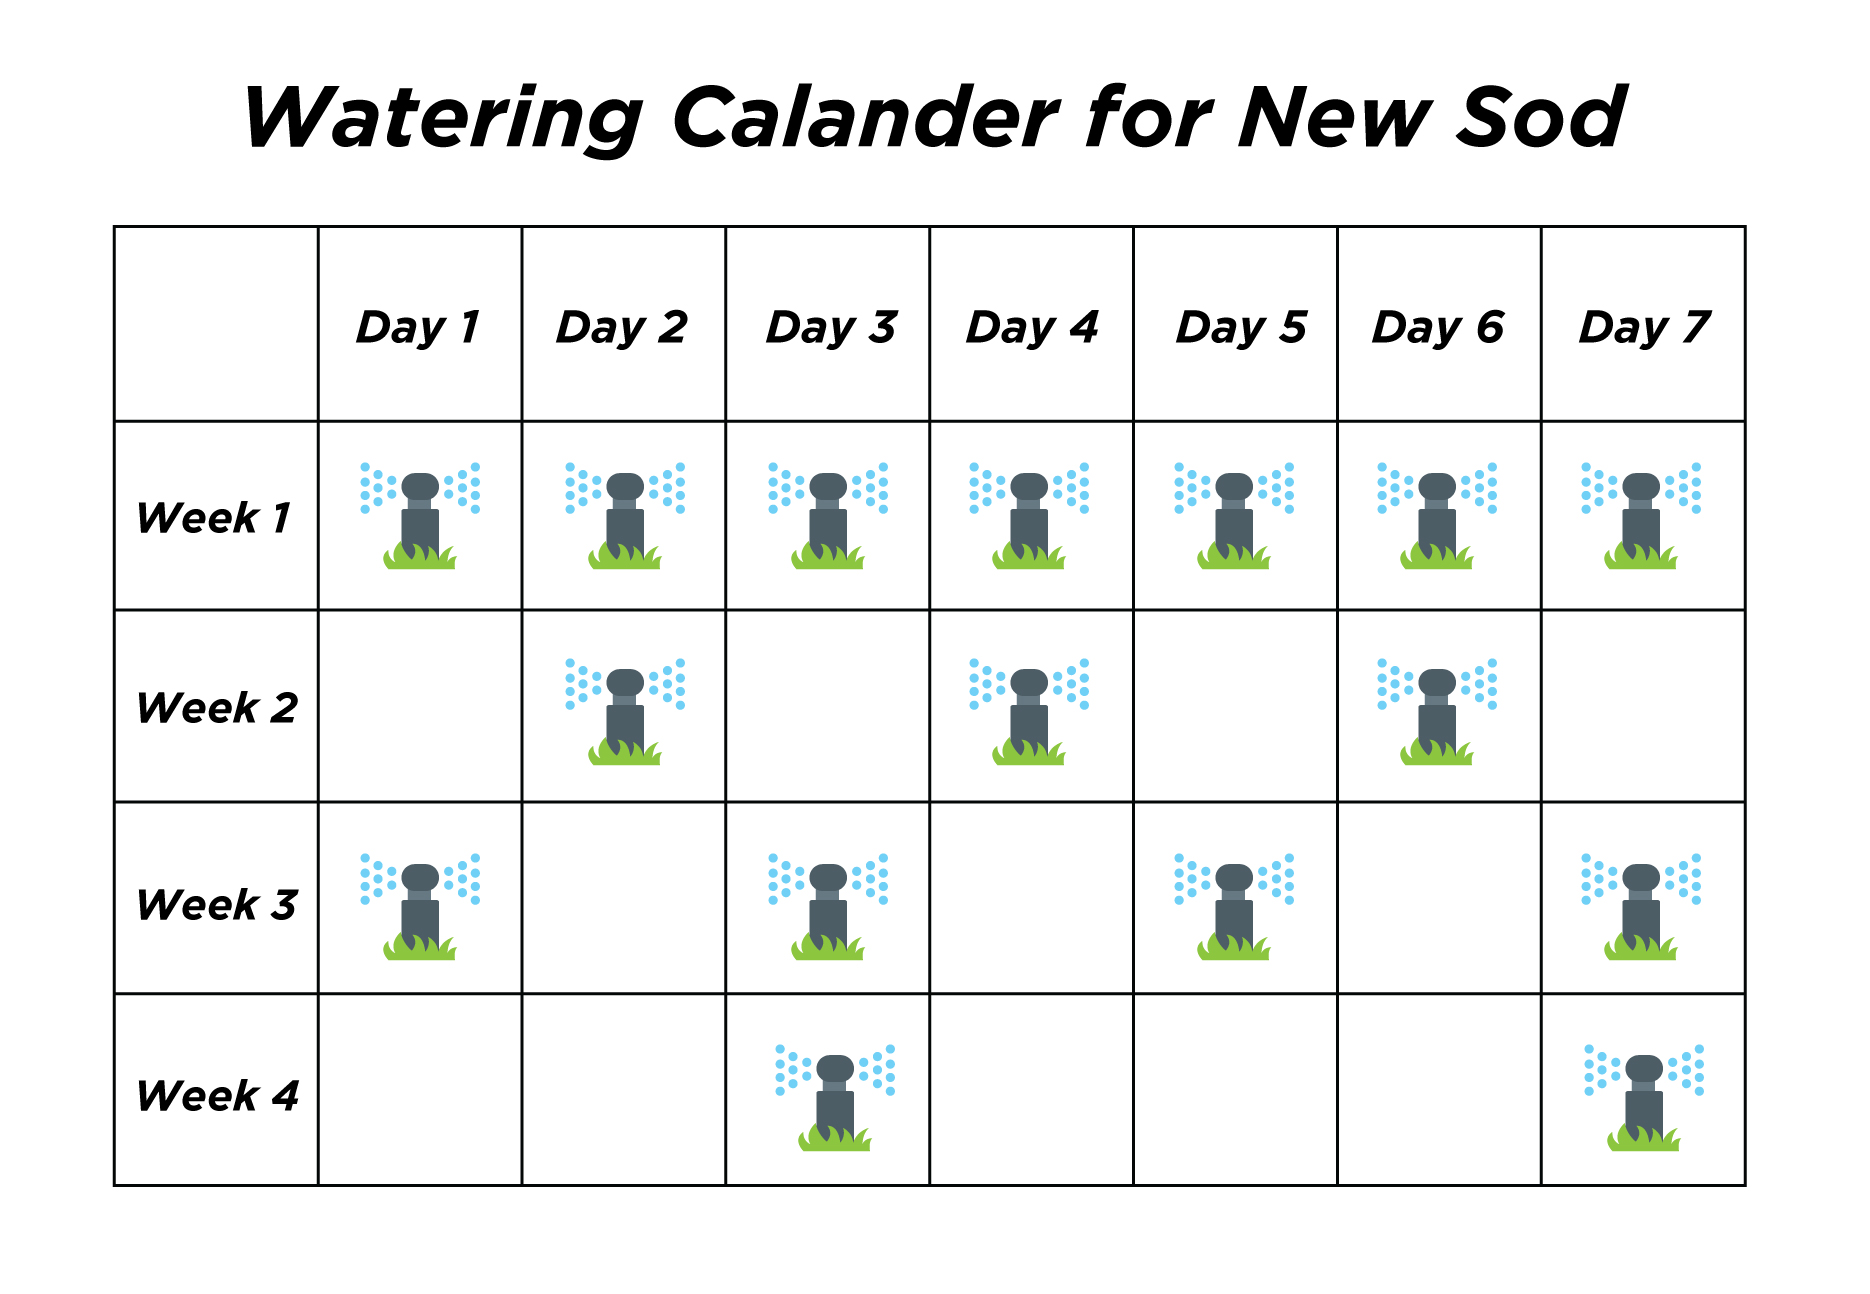 watering calander for new sod